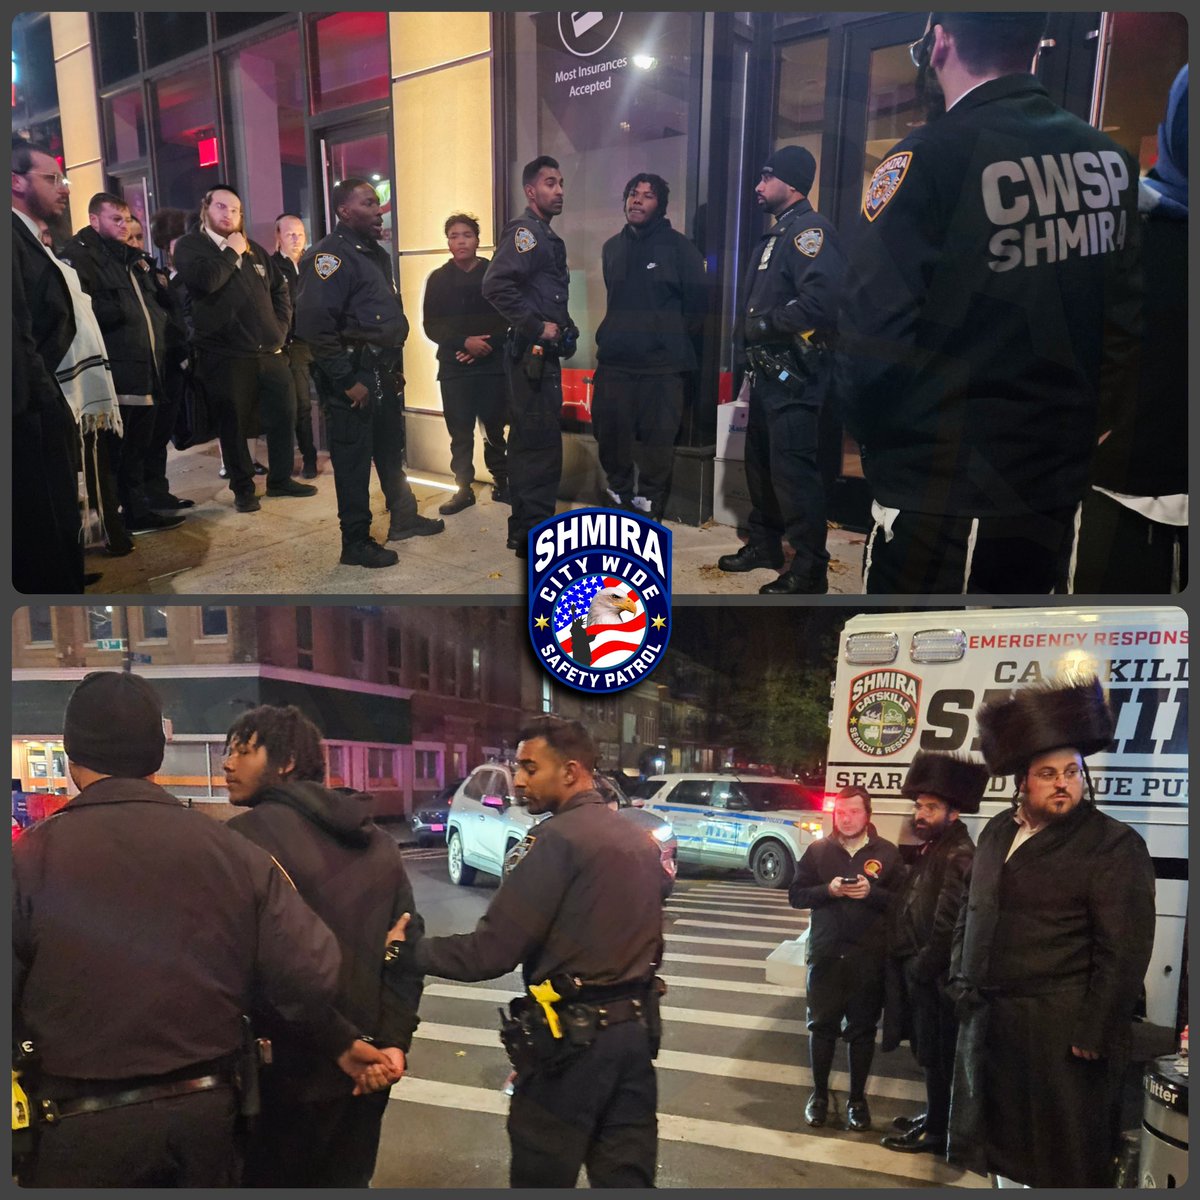 Thanks to the quick response by our #Shmira volunteers to a #Hotline call of a male stealing a scooter, the suspect was apprehended and arrested by @NYPD66Pct. #TeamWork #ItsWhatWeDo #FightingCrime